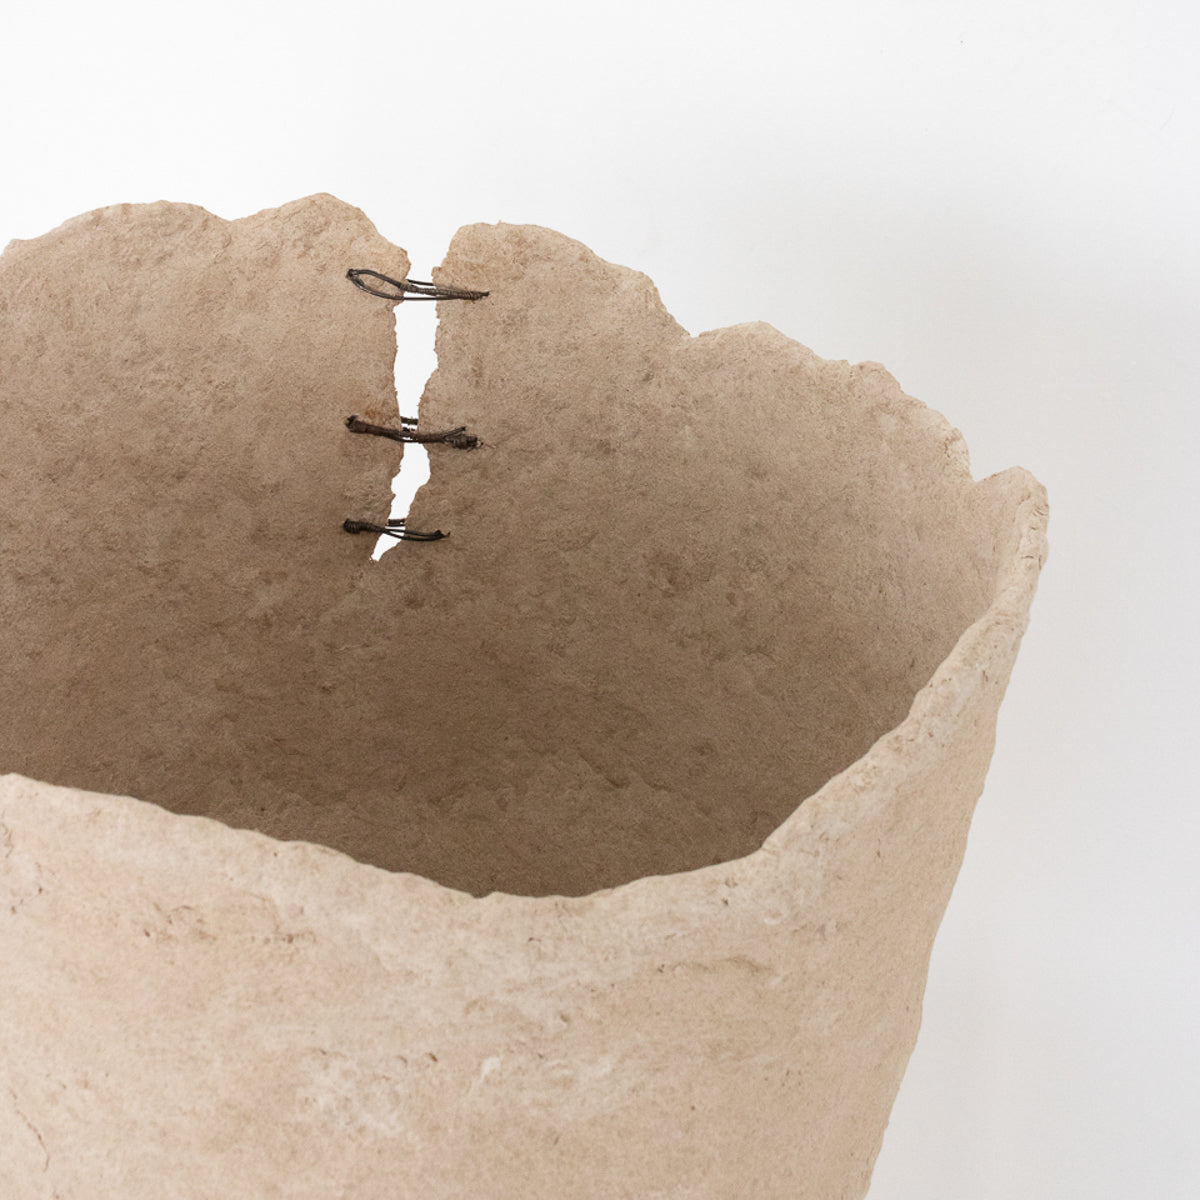 Handmade by designer Jennifer Alden, Vessel Study No. 42 is a contemporary sculpture made from paper clay and wire. Each unique vessel in this collection is one-of-a-kind, rare, and both primitive and modern. Inside detail.